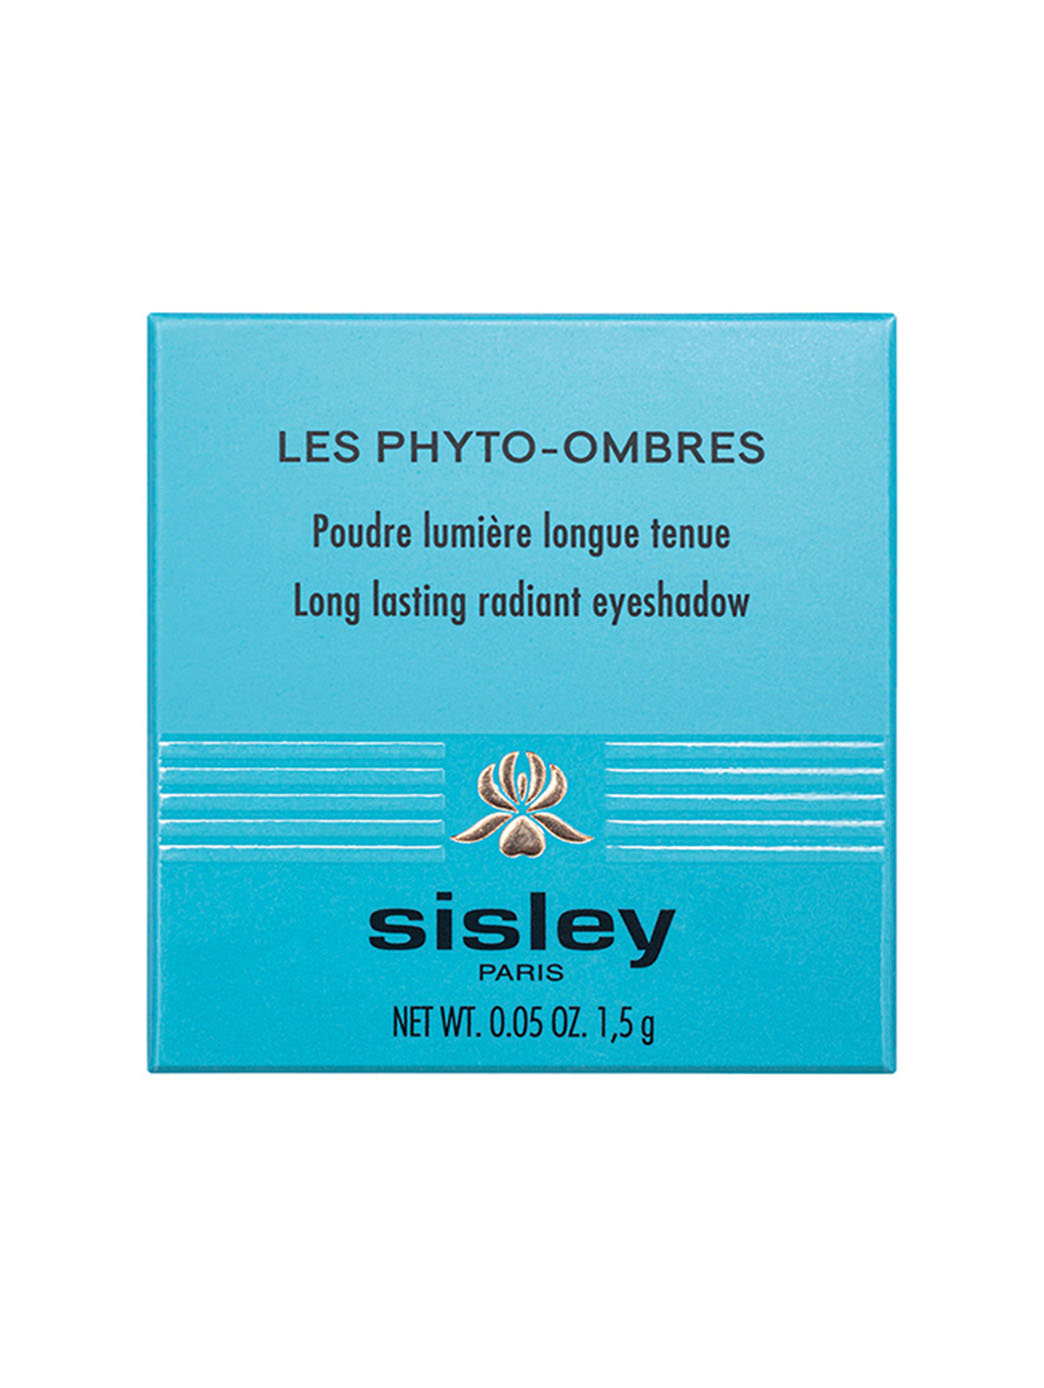 42472956493974 - Les Phyto-Ombres